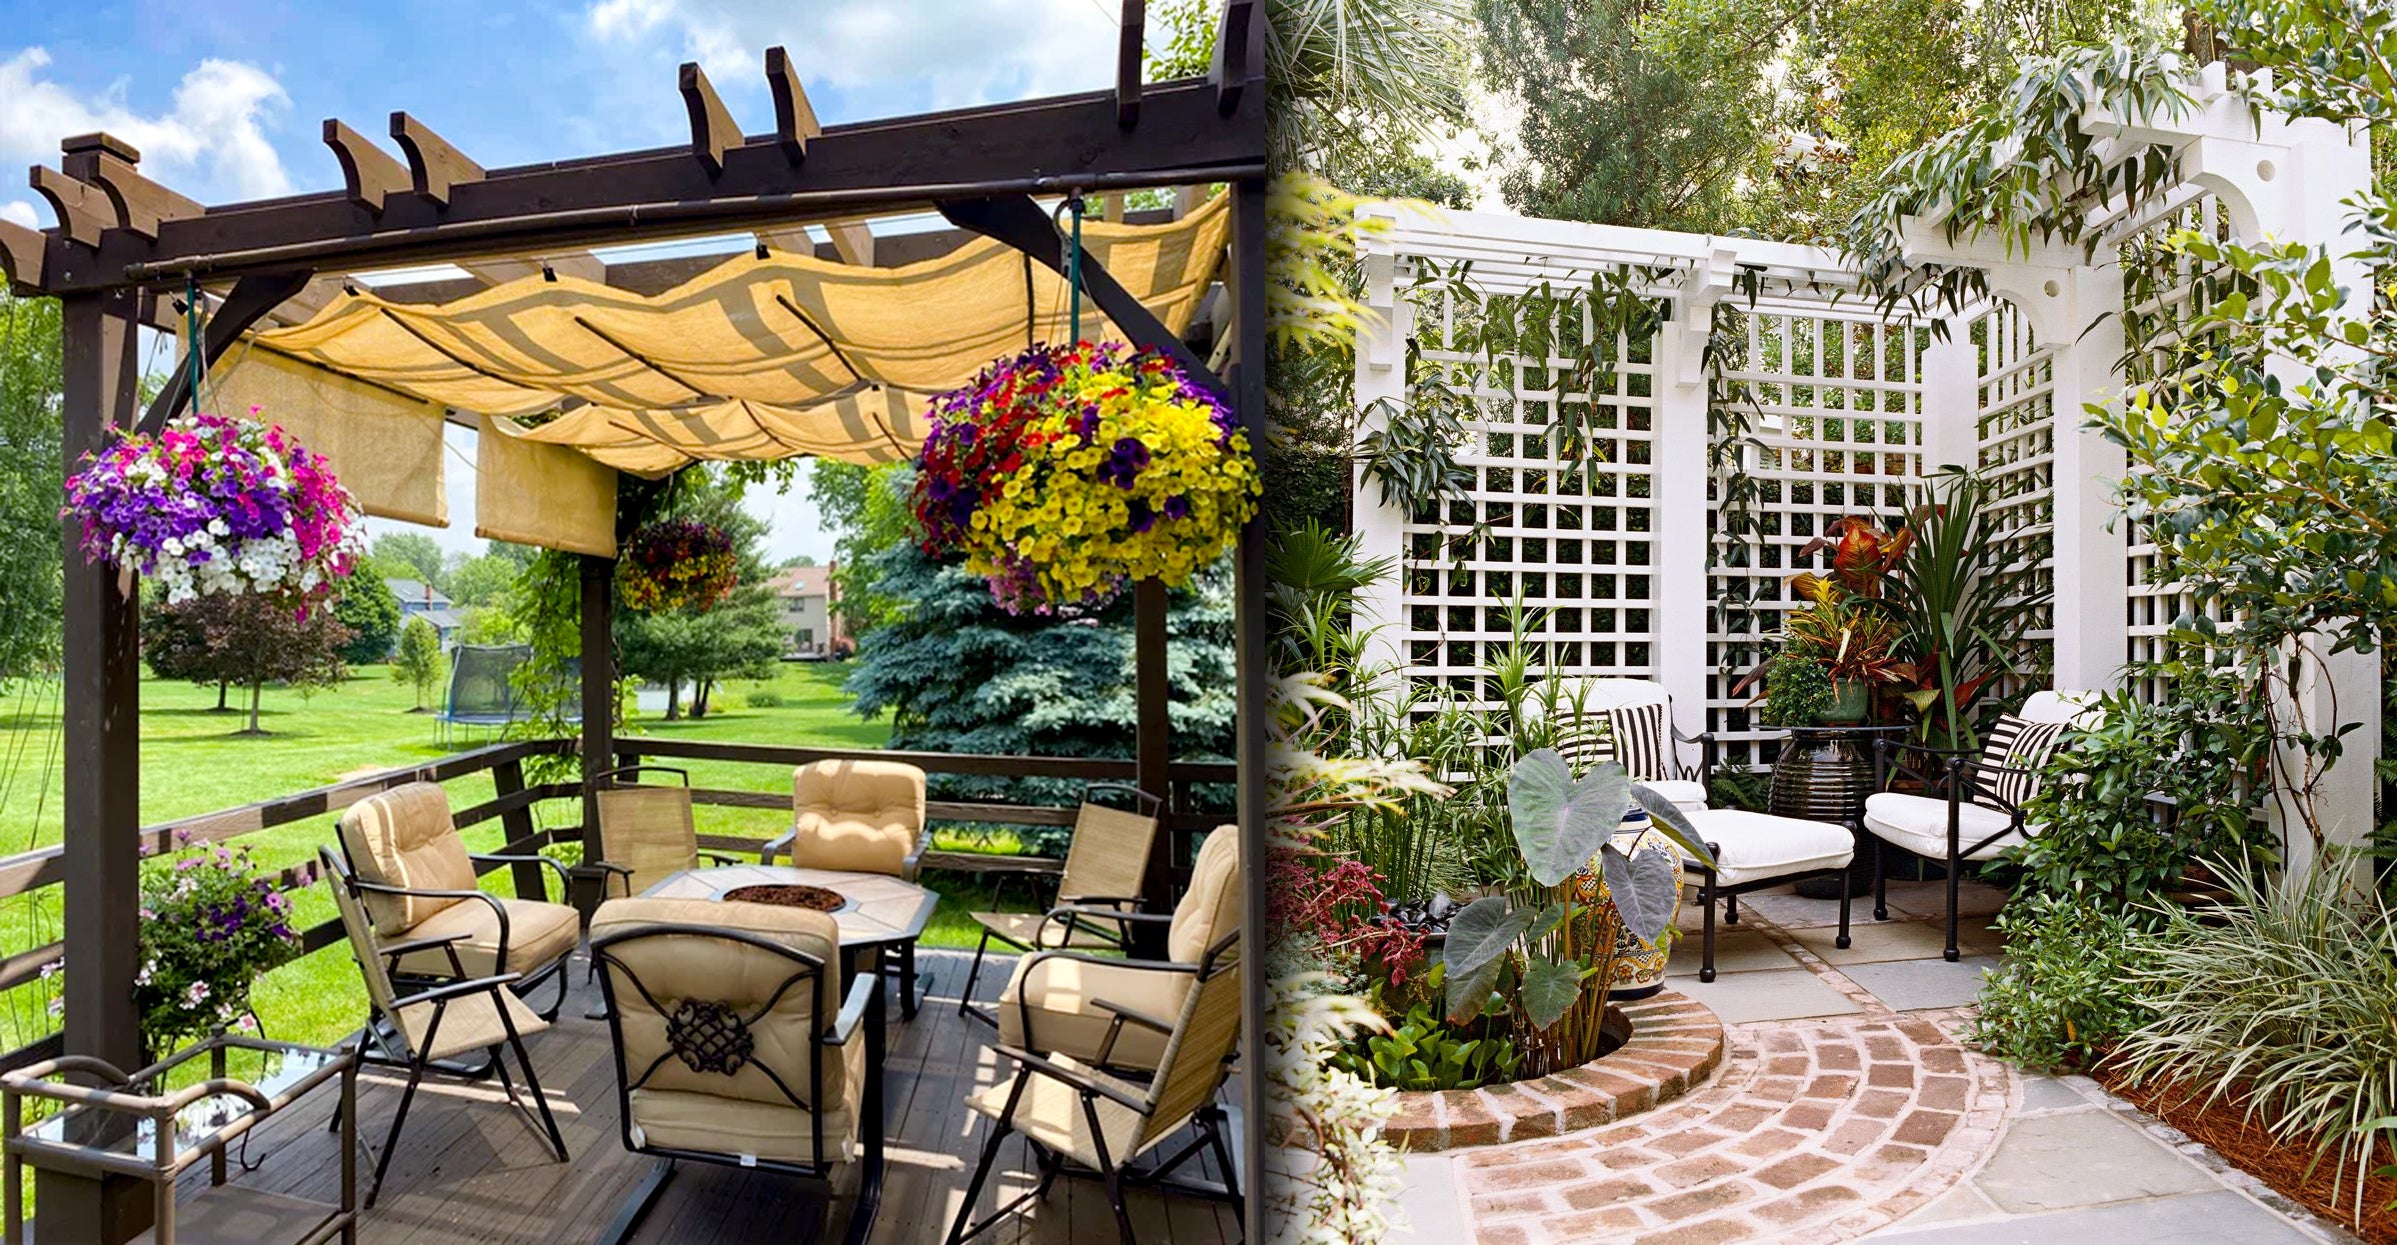 pergola and trellis with outdoor furnitures and plants